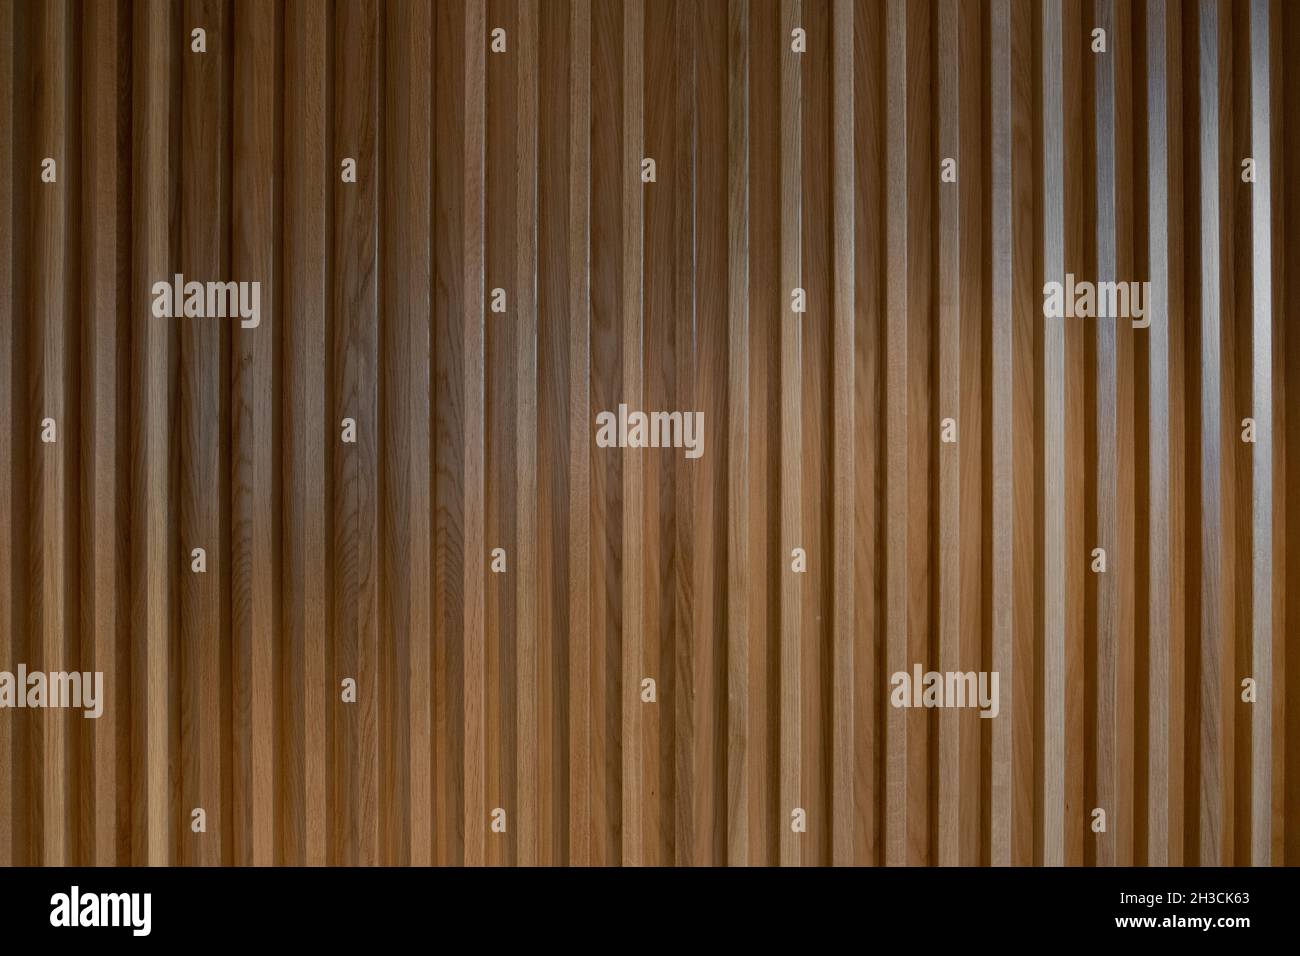 Ribbed wood wall background. Wooden textured panel. Interior design detail. Stock Photo